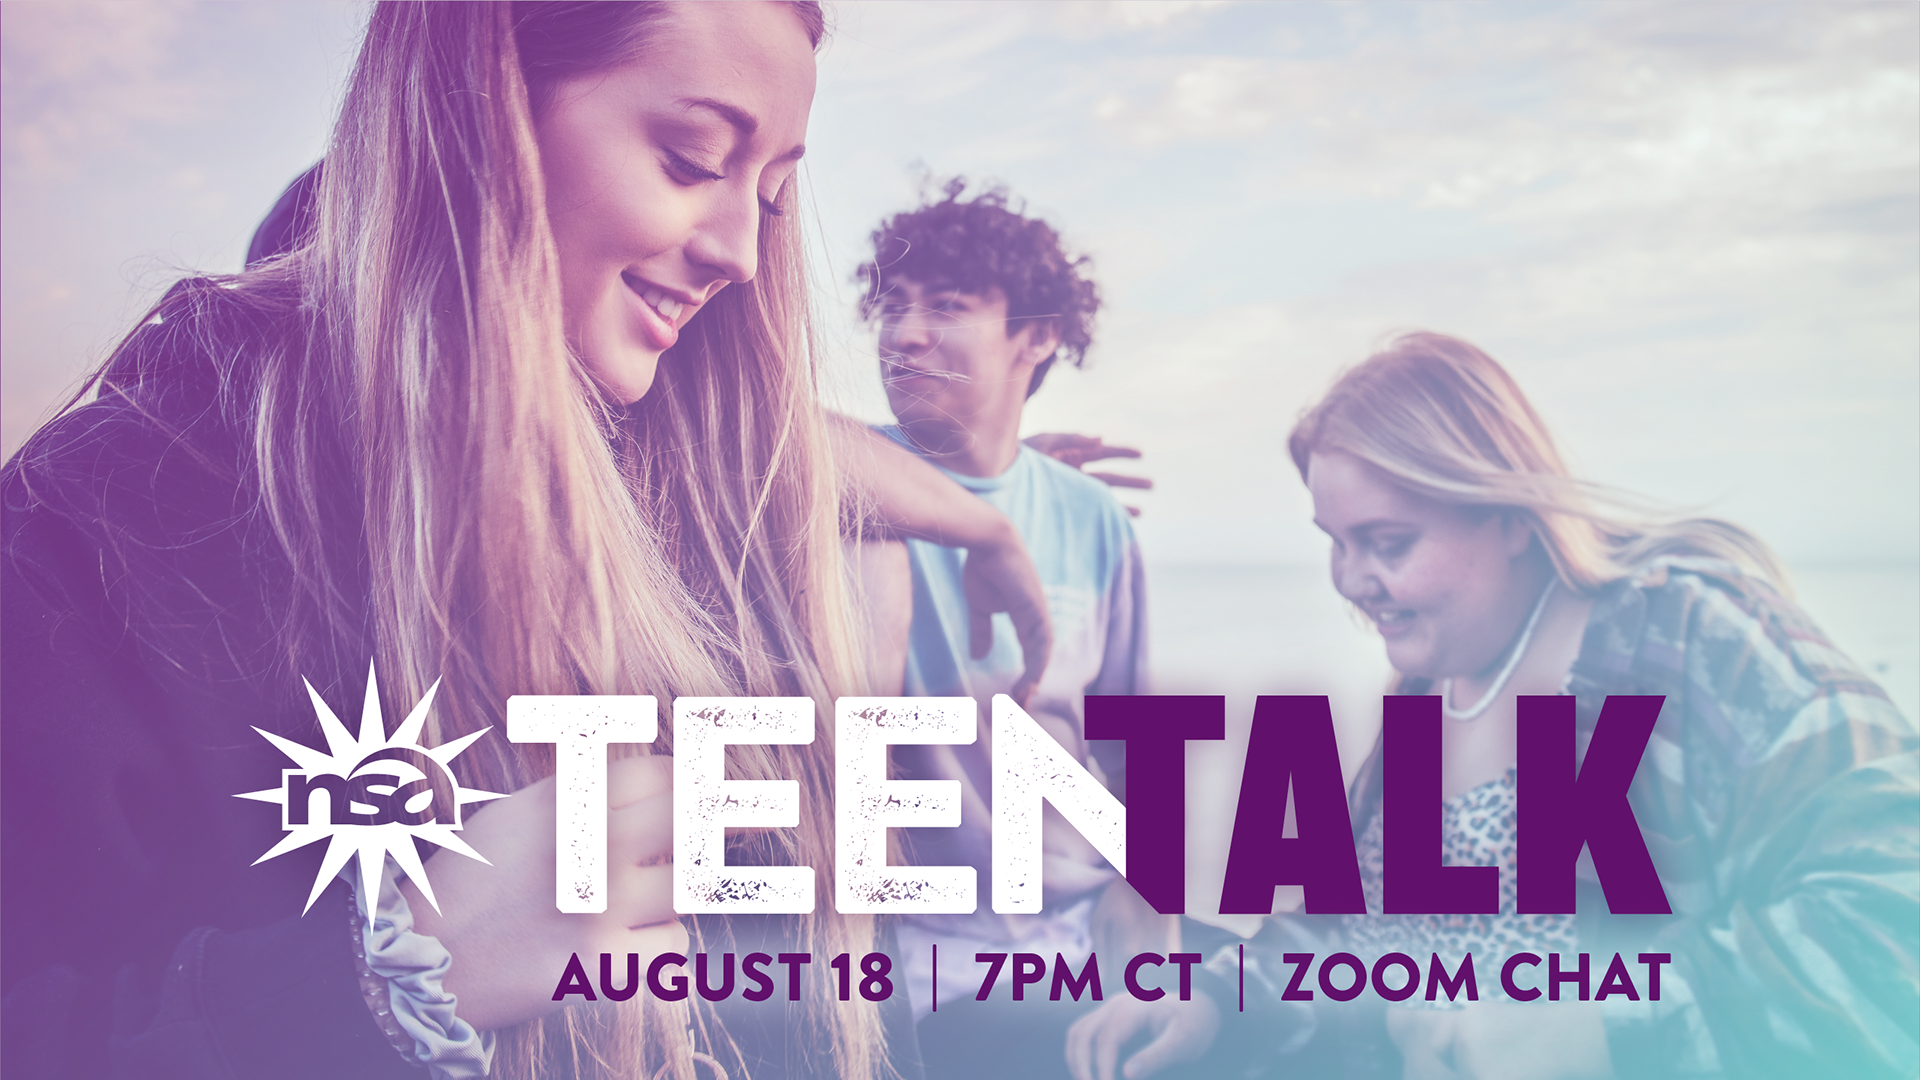 A joyful group of teenagers gather outdoors as text on the image reads: "nsa Teen Talk. August 18 | 7PM CT | Zoom Chat." The background features a cloudy sky, and everyone appears happy and engaged in conversation.